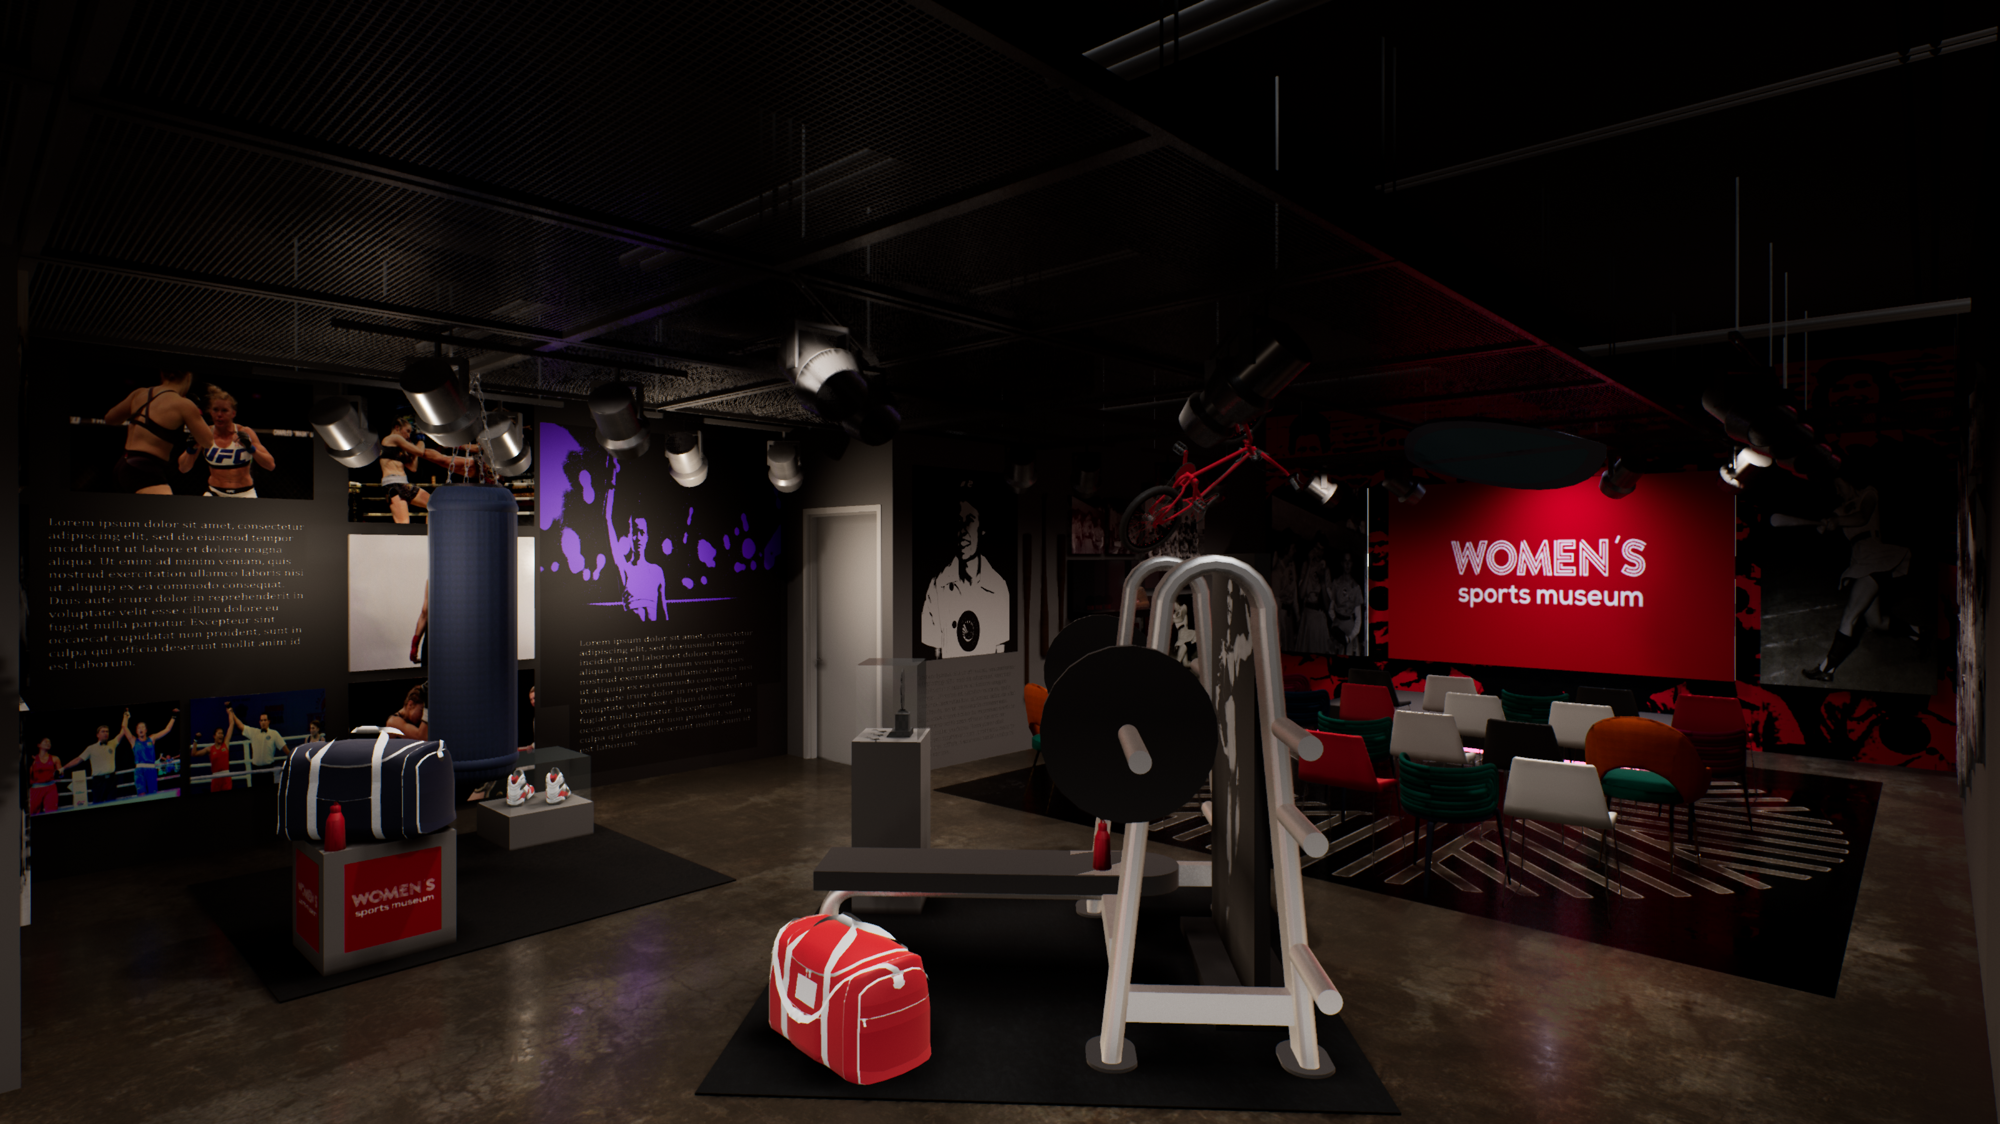 In addition to standard exhibits, the Women’s Sports Museum preview center will include interactive experiences and space for events, presentations and speakers.